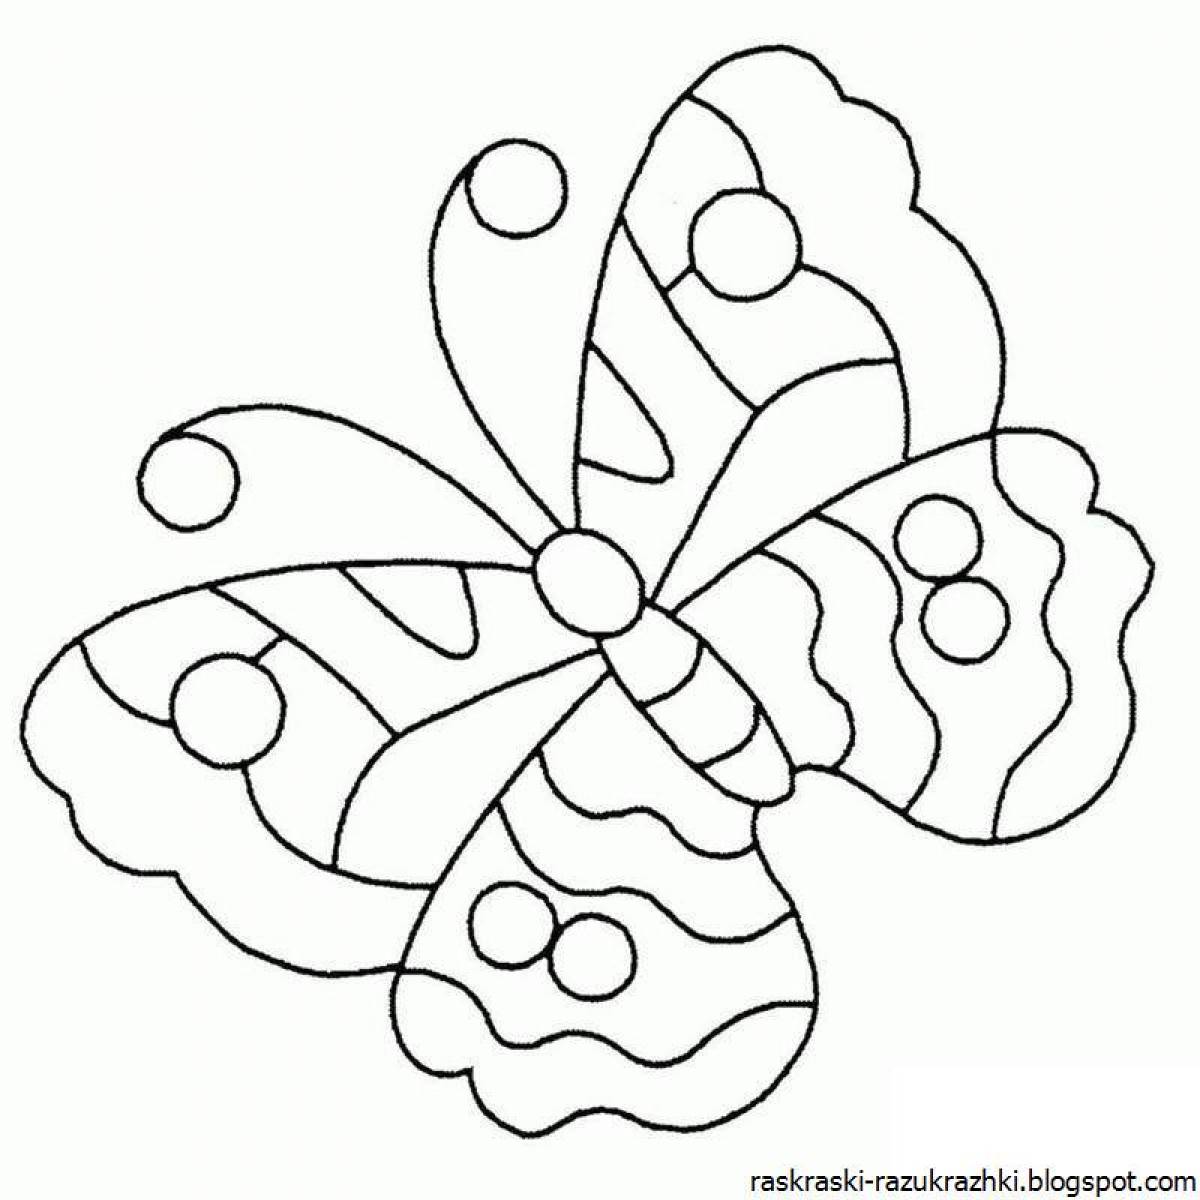 A fun butterfly coloring book for kids 3-4 years old